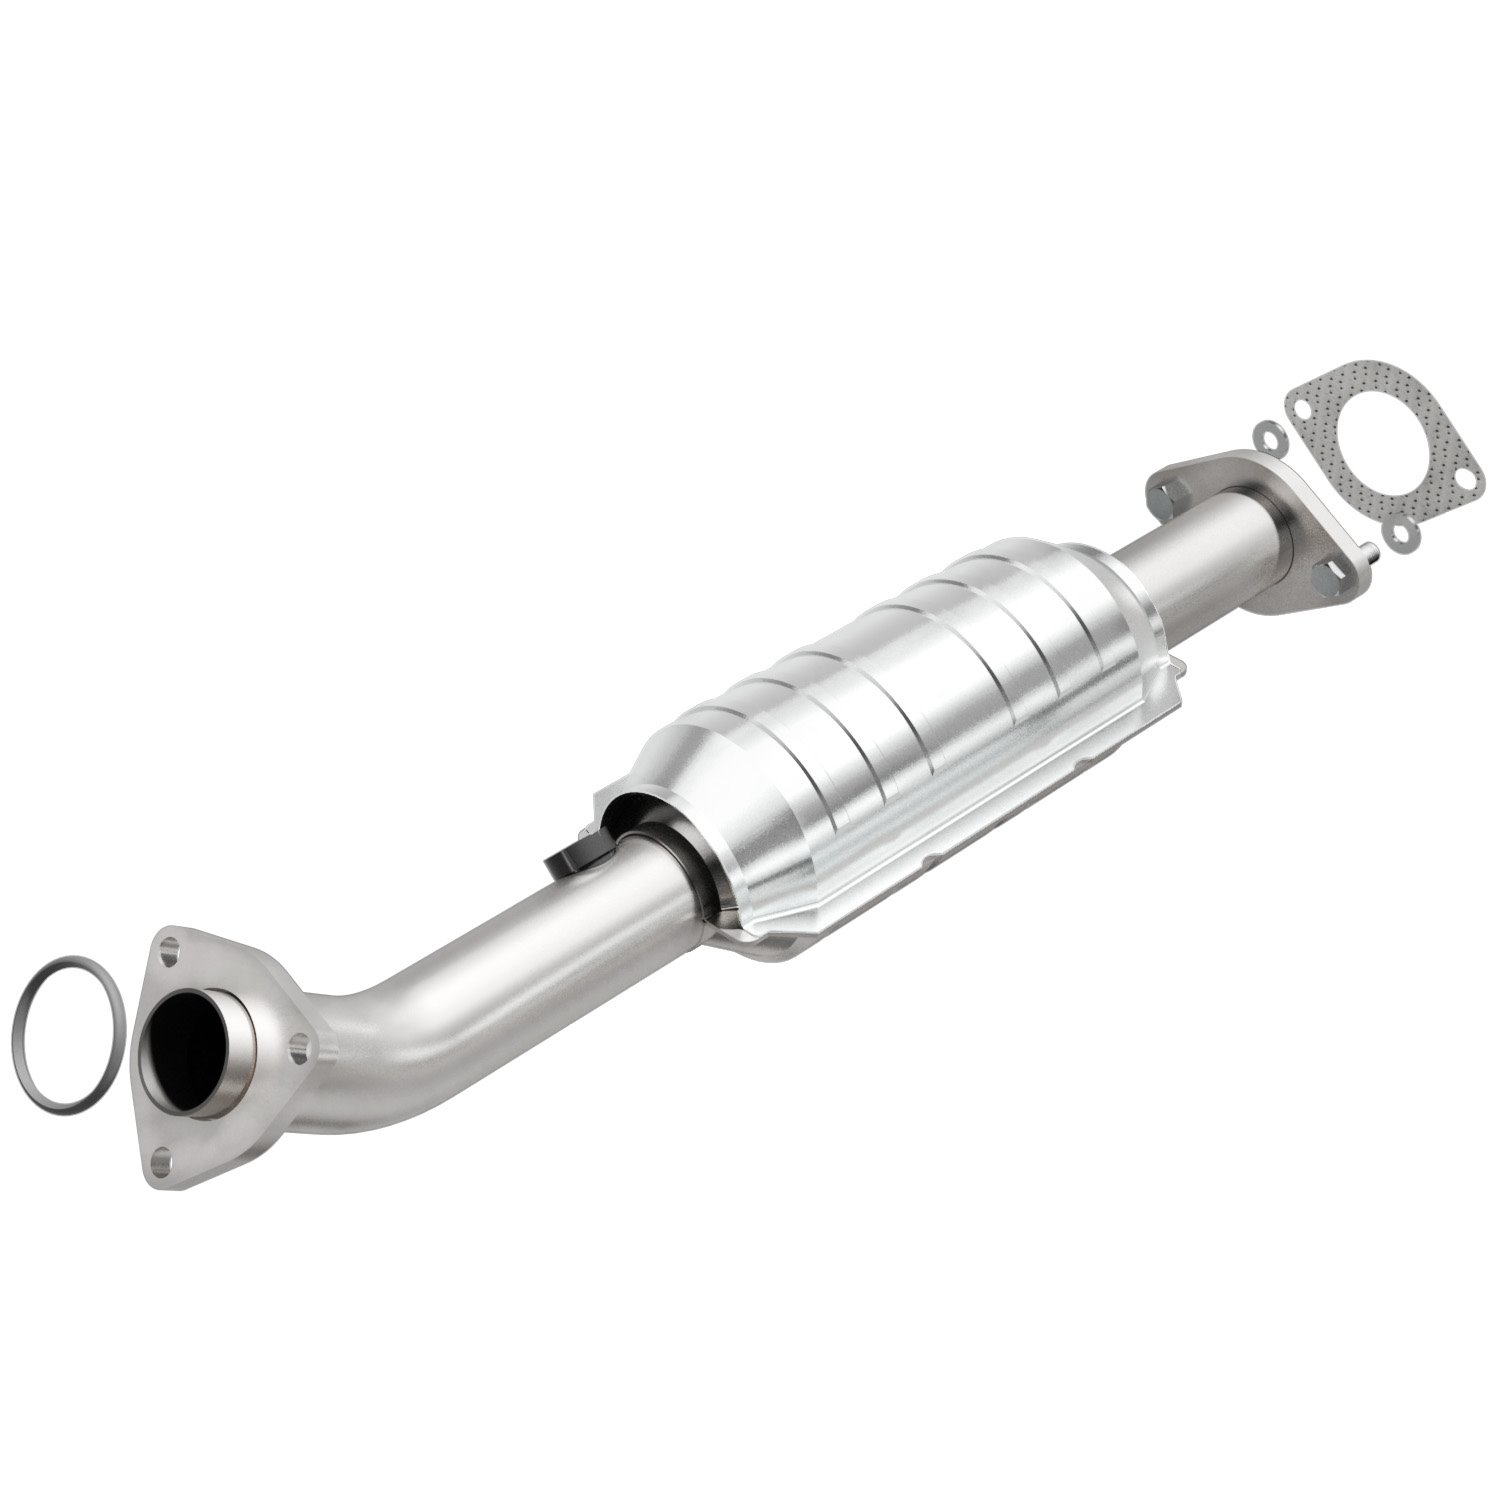 HM Grade Federal / EPA Compliant Direct-Fit Catalytic Converter 24748